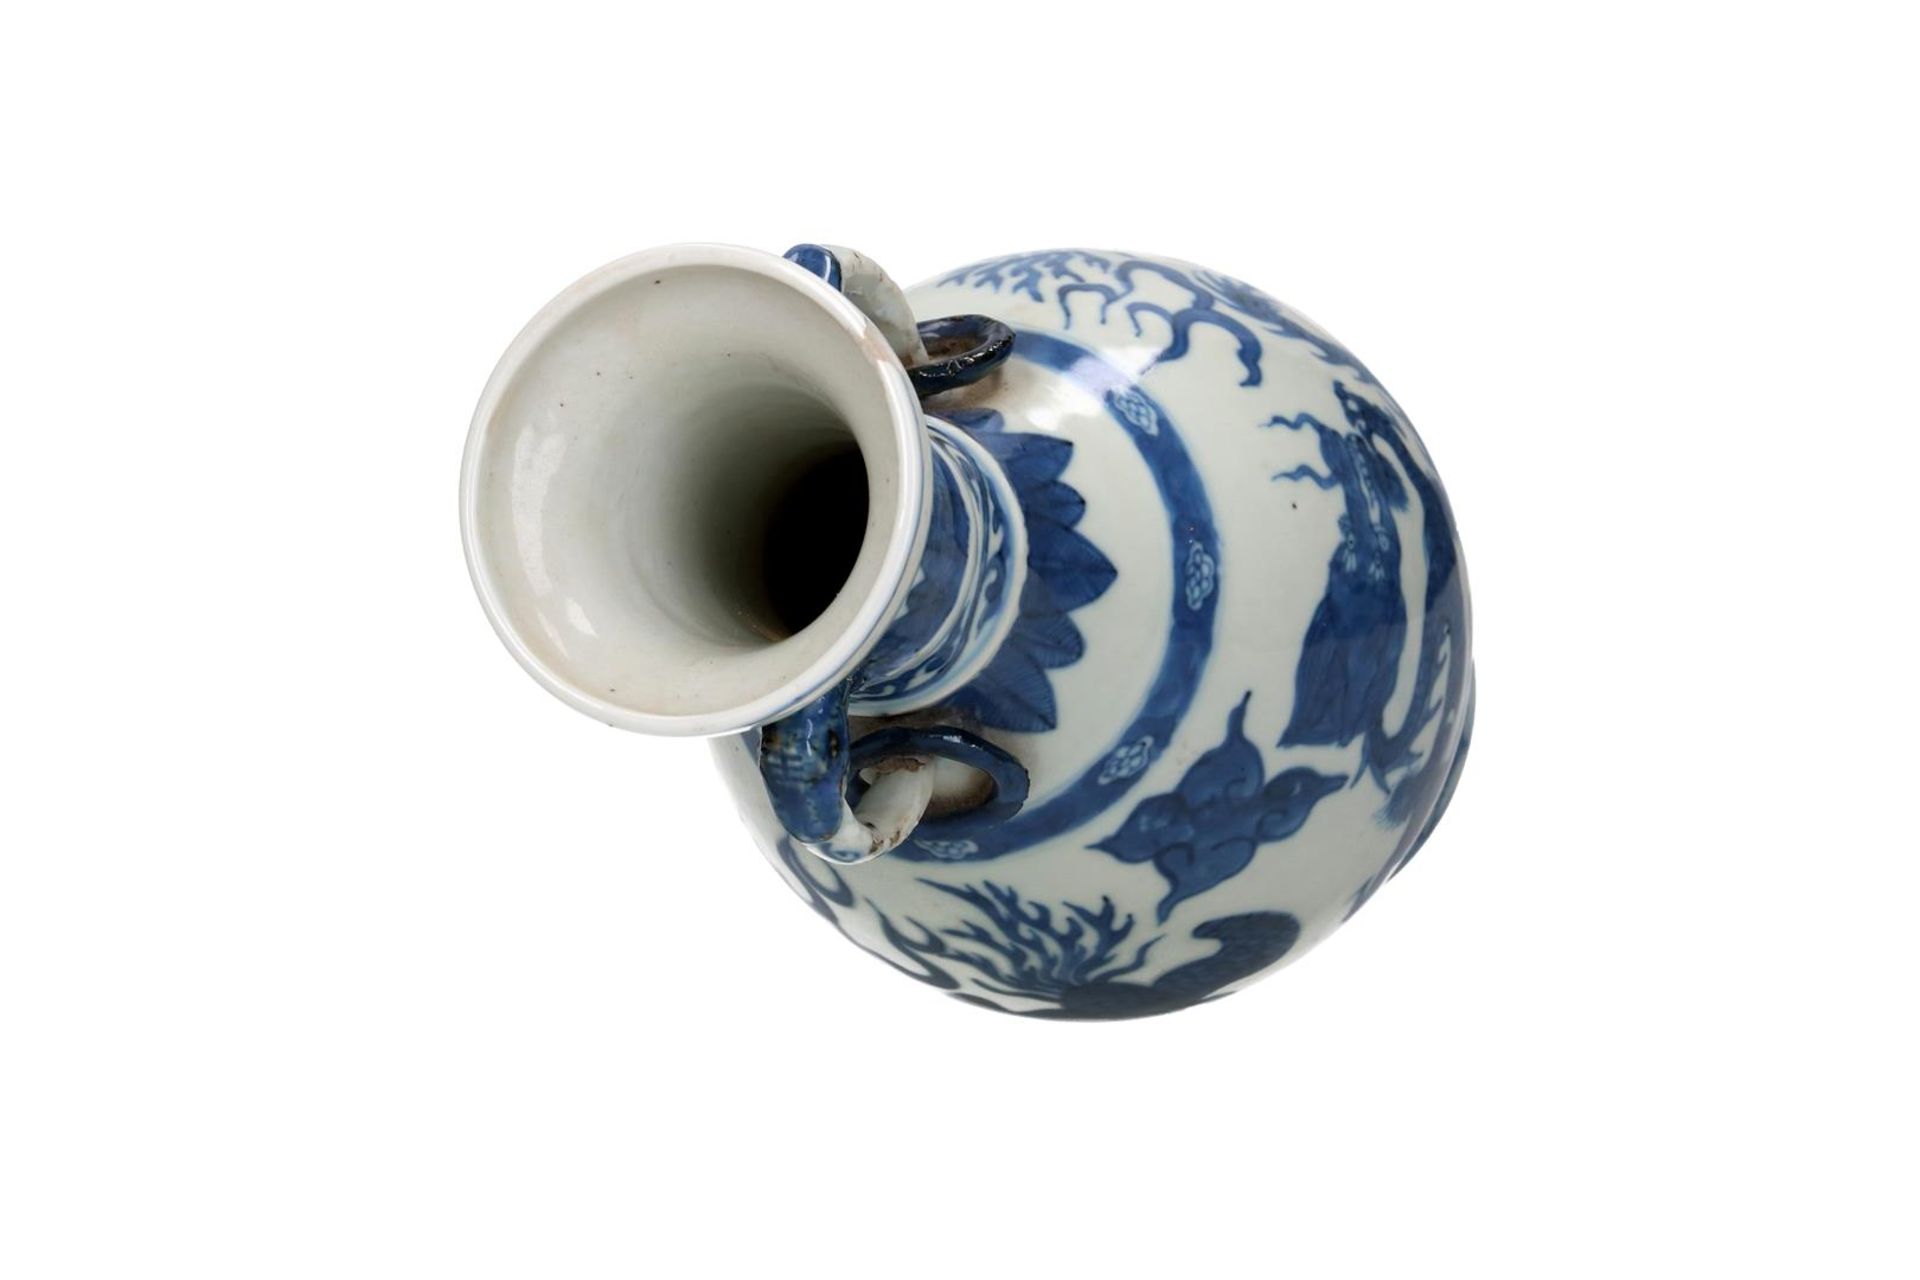 A blue and white porcelain vase, with two handles with rings in the shape of animals and a - Image 3 of 7